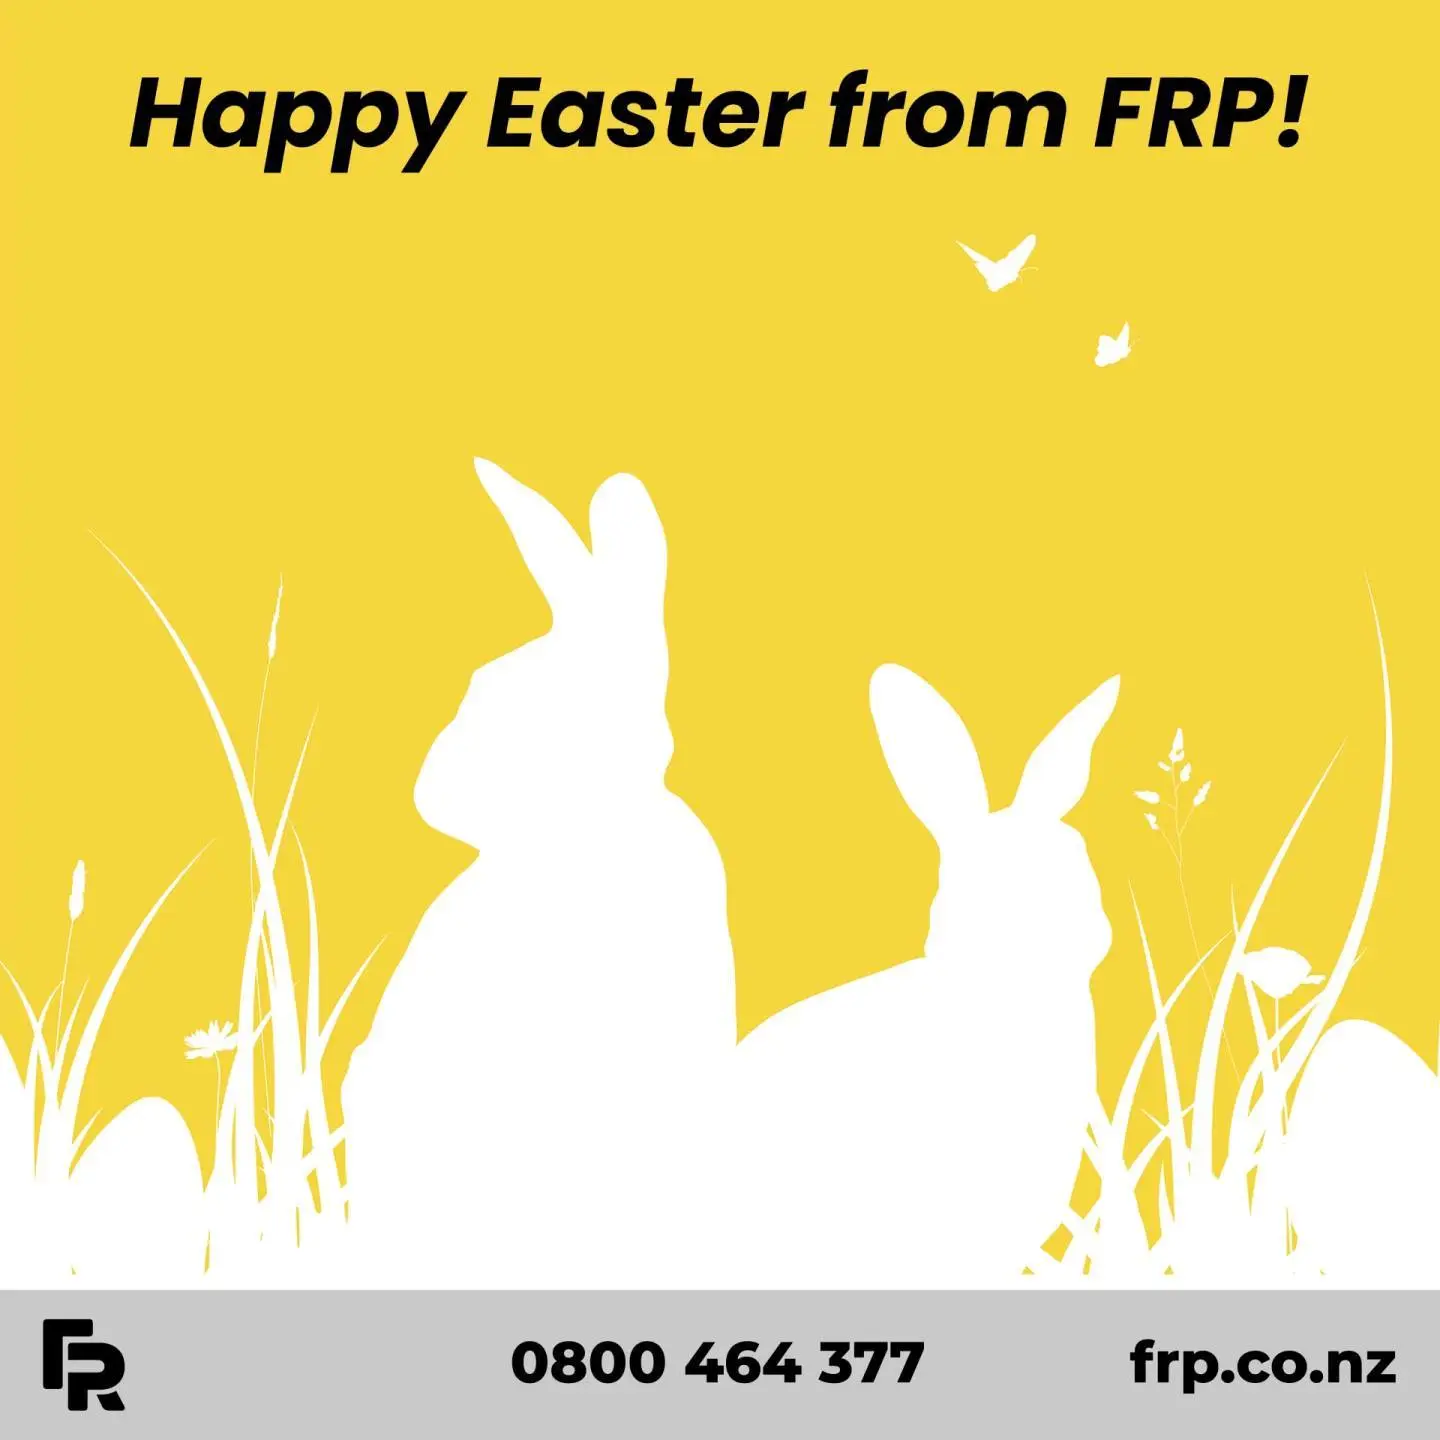 We will be back in the office on Tuesday the 2nd of April. From the team at FRP, enjoy the Easter break!

#frp #frpproducts #happyeaster #easterholidays